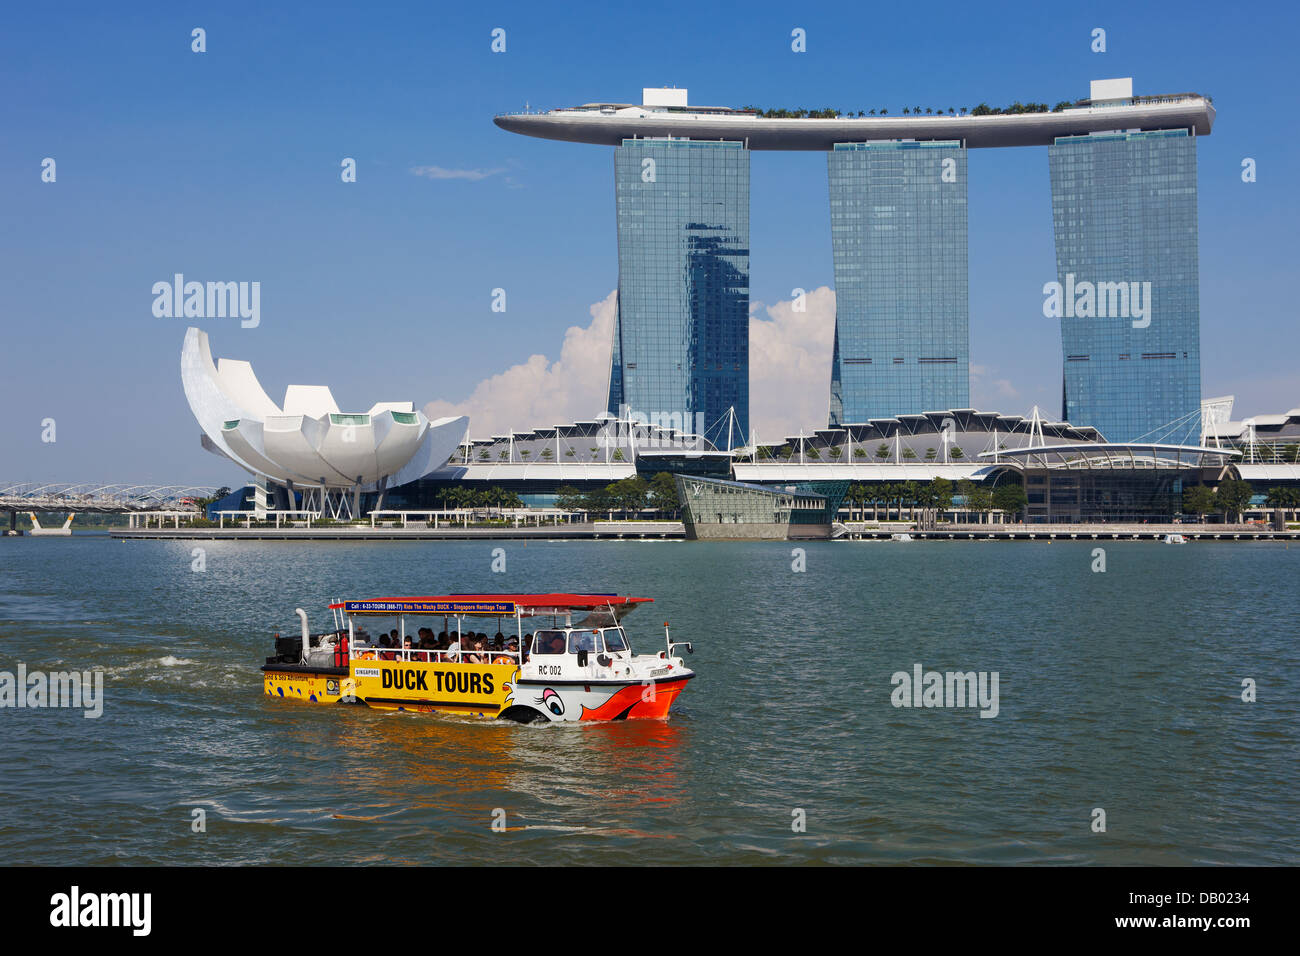 Duck Tours DUKW amphibious vehicle passing by the Marina Bay Sands Hotel, Singapore. Stock Photo